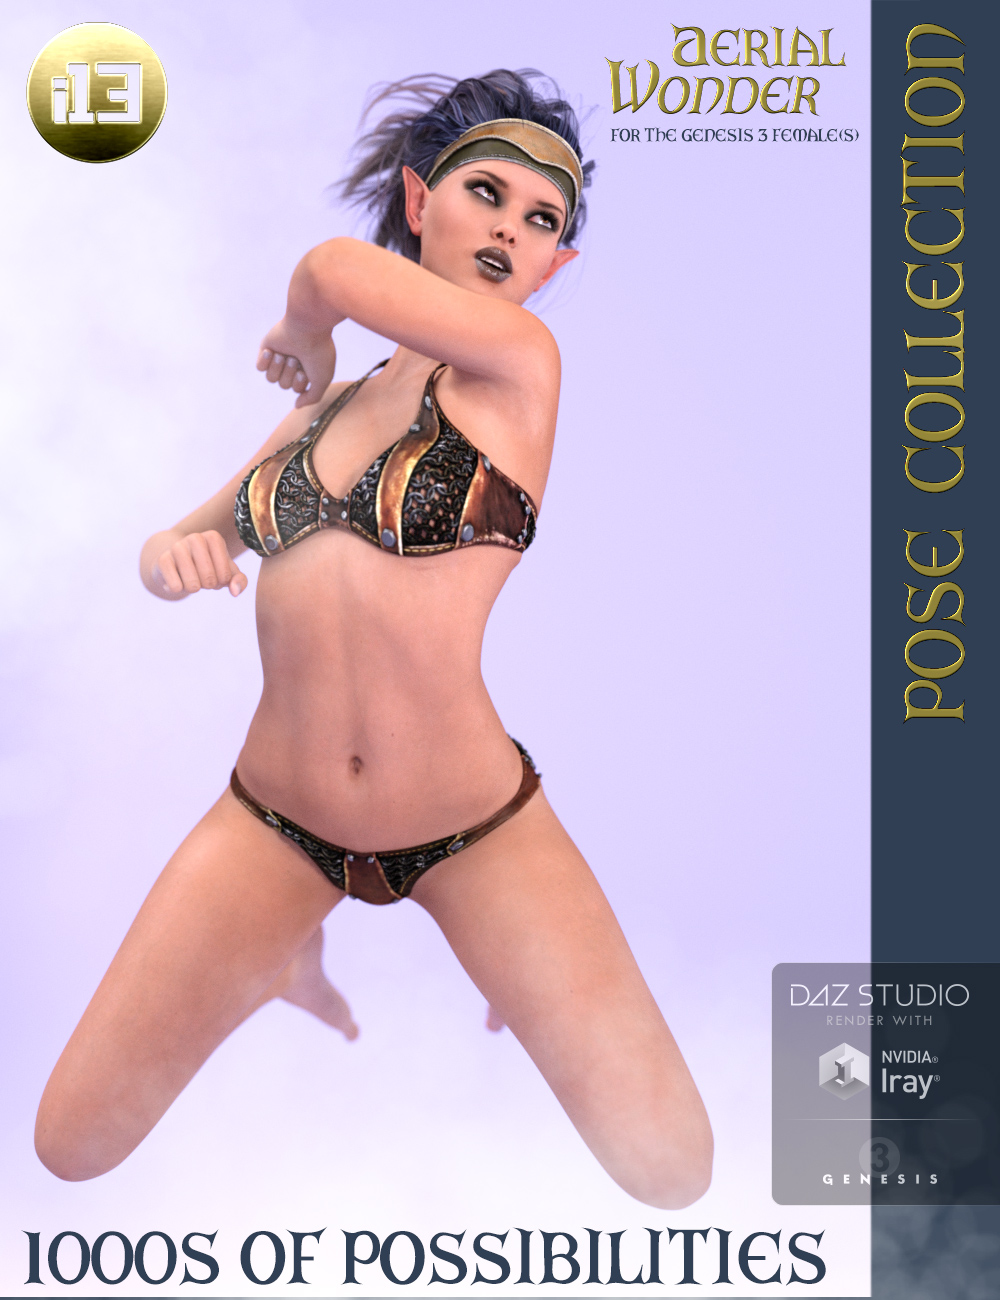 i13 Aerial Wonder for the Genesis 3 Female(s) by: ironman13, 3D Models by Daz 3D